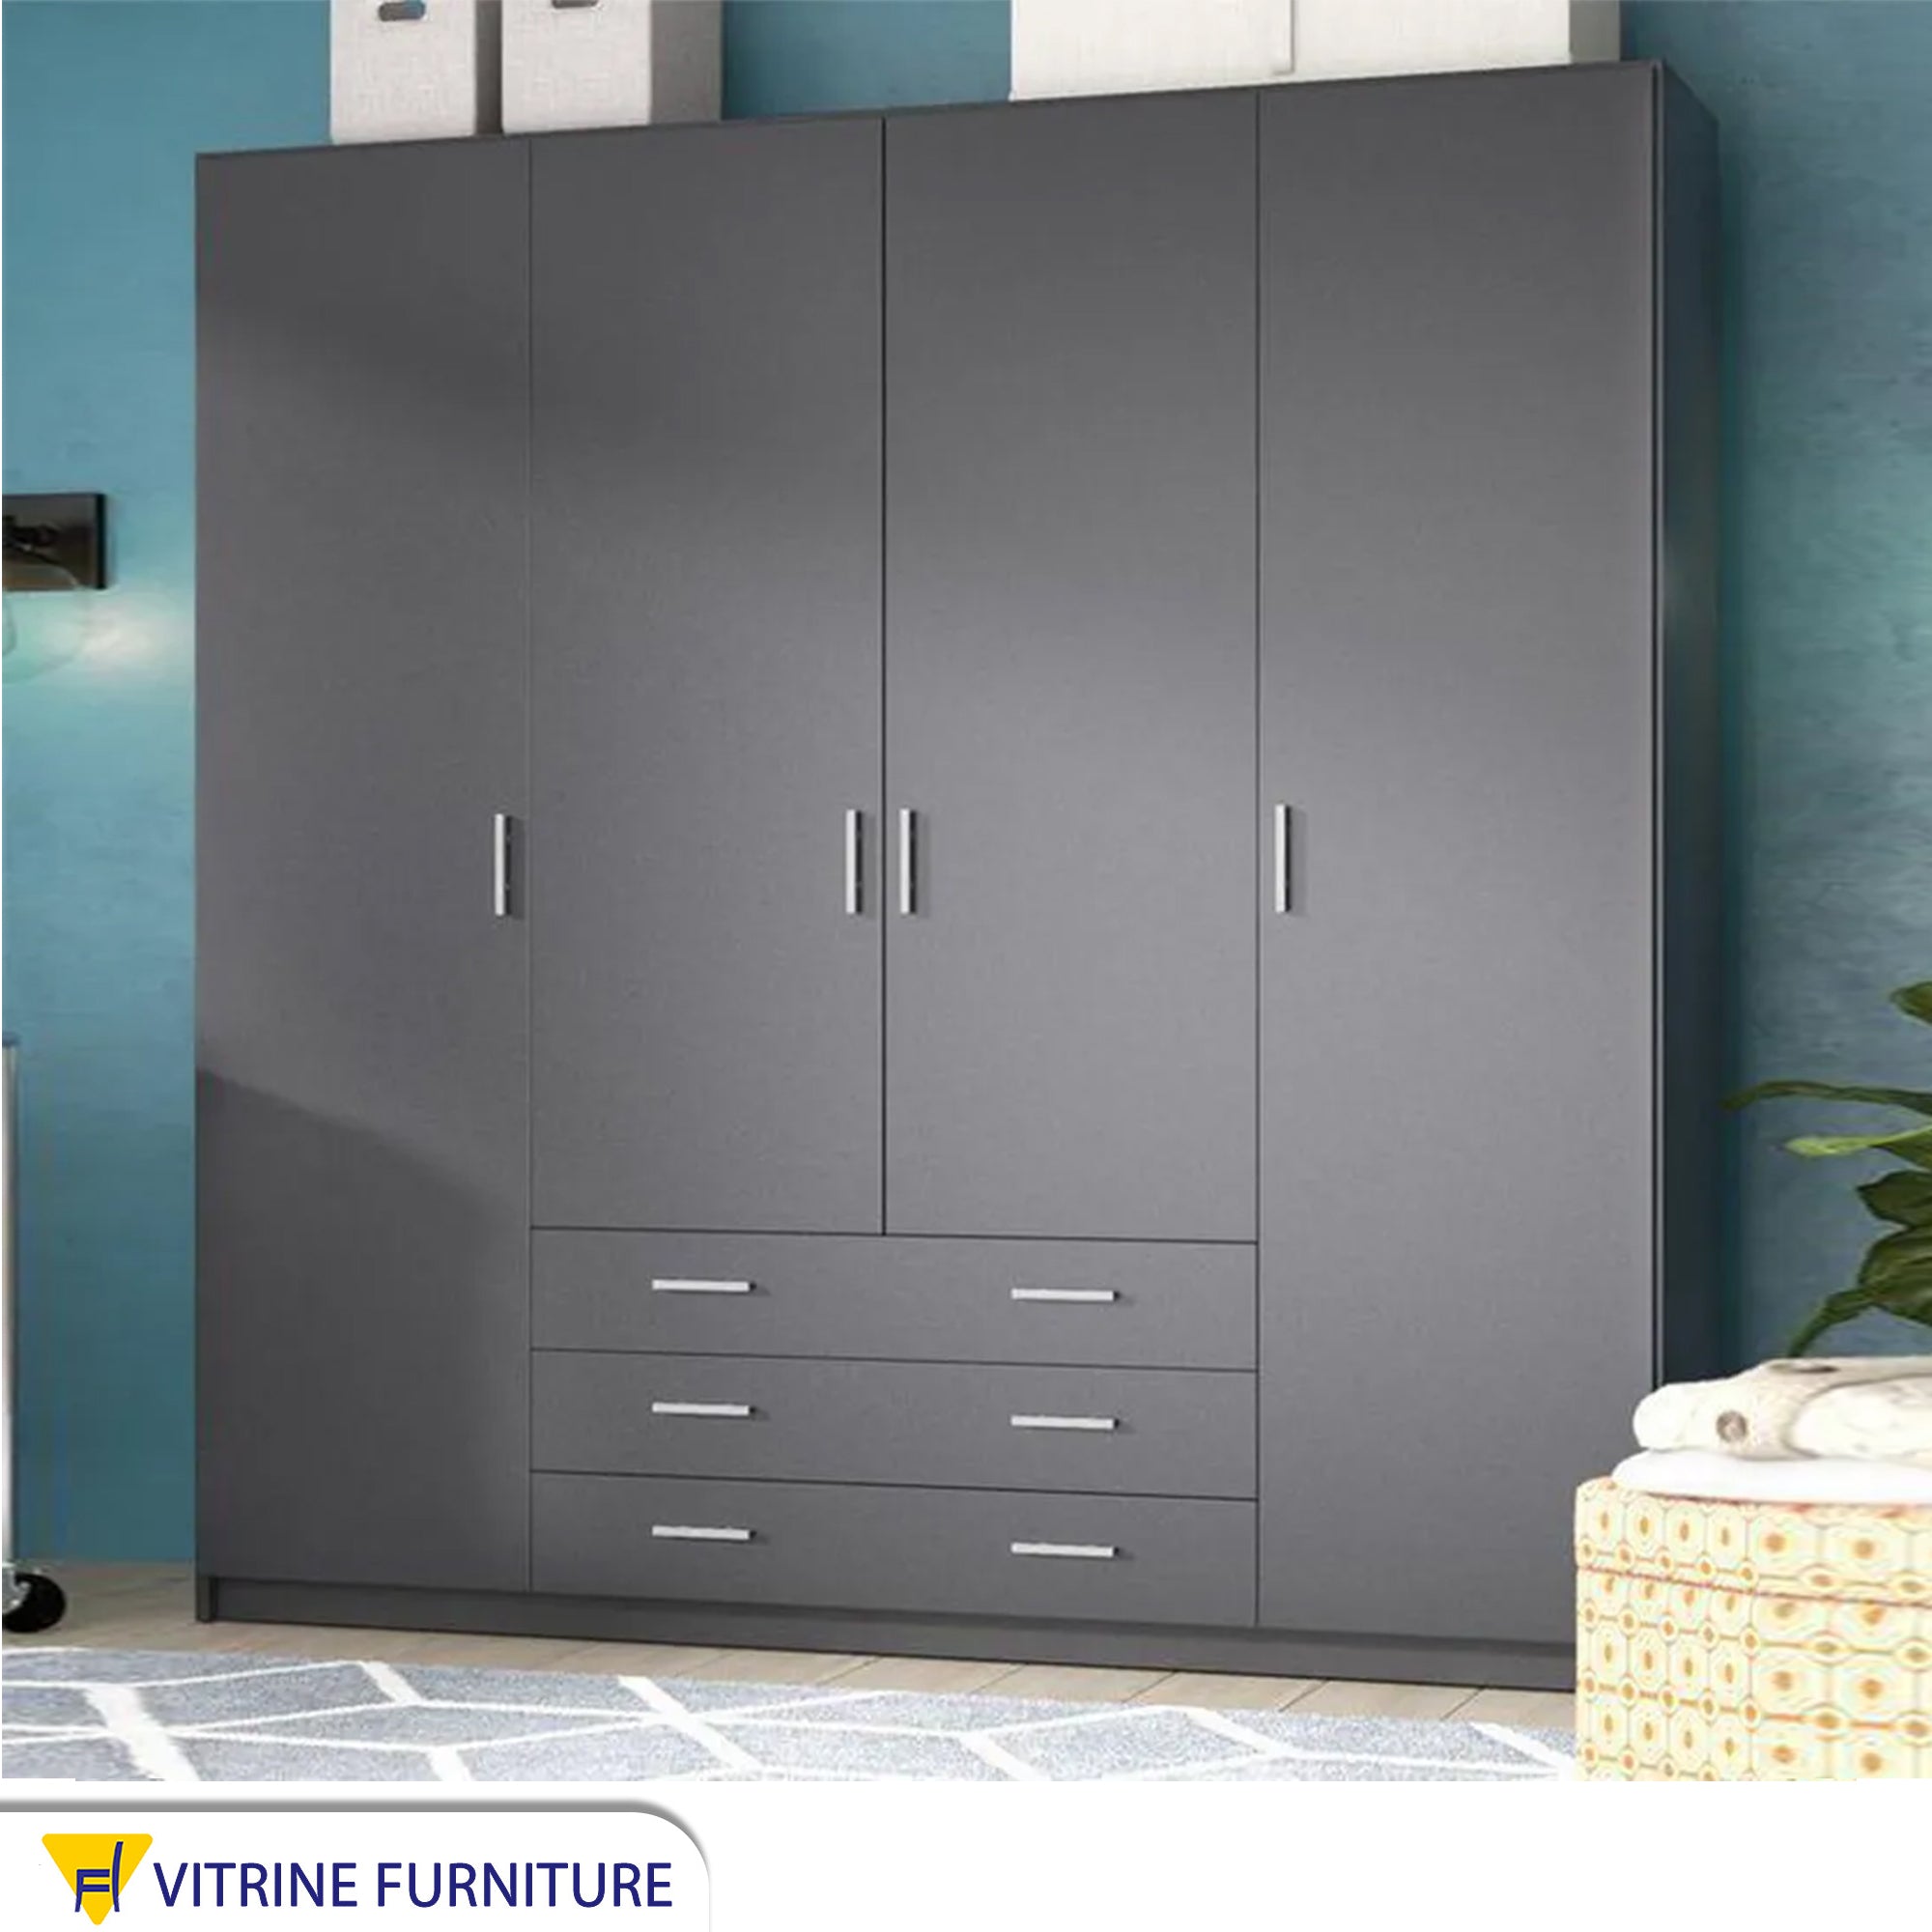 A large gray dresser with four doors and six drawers